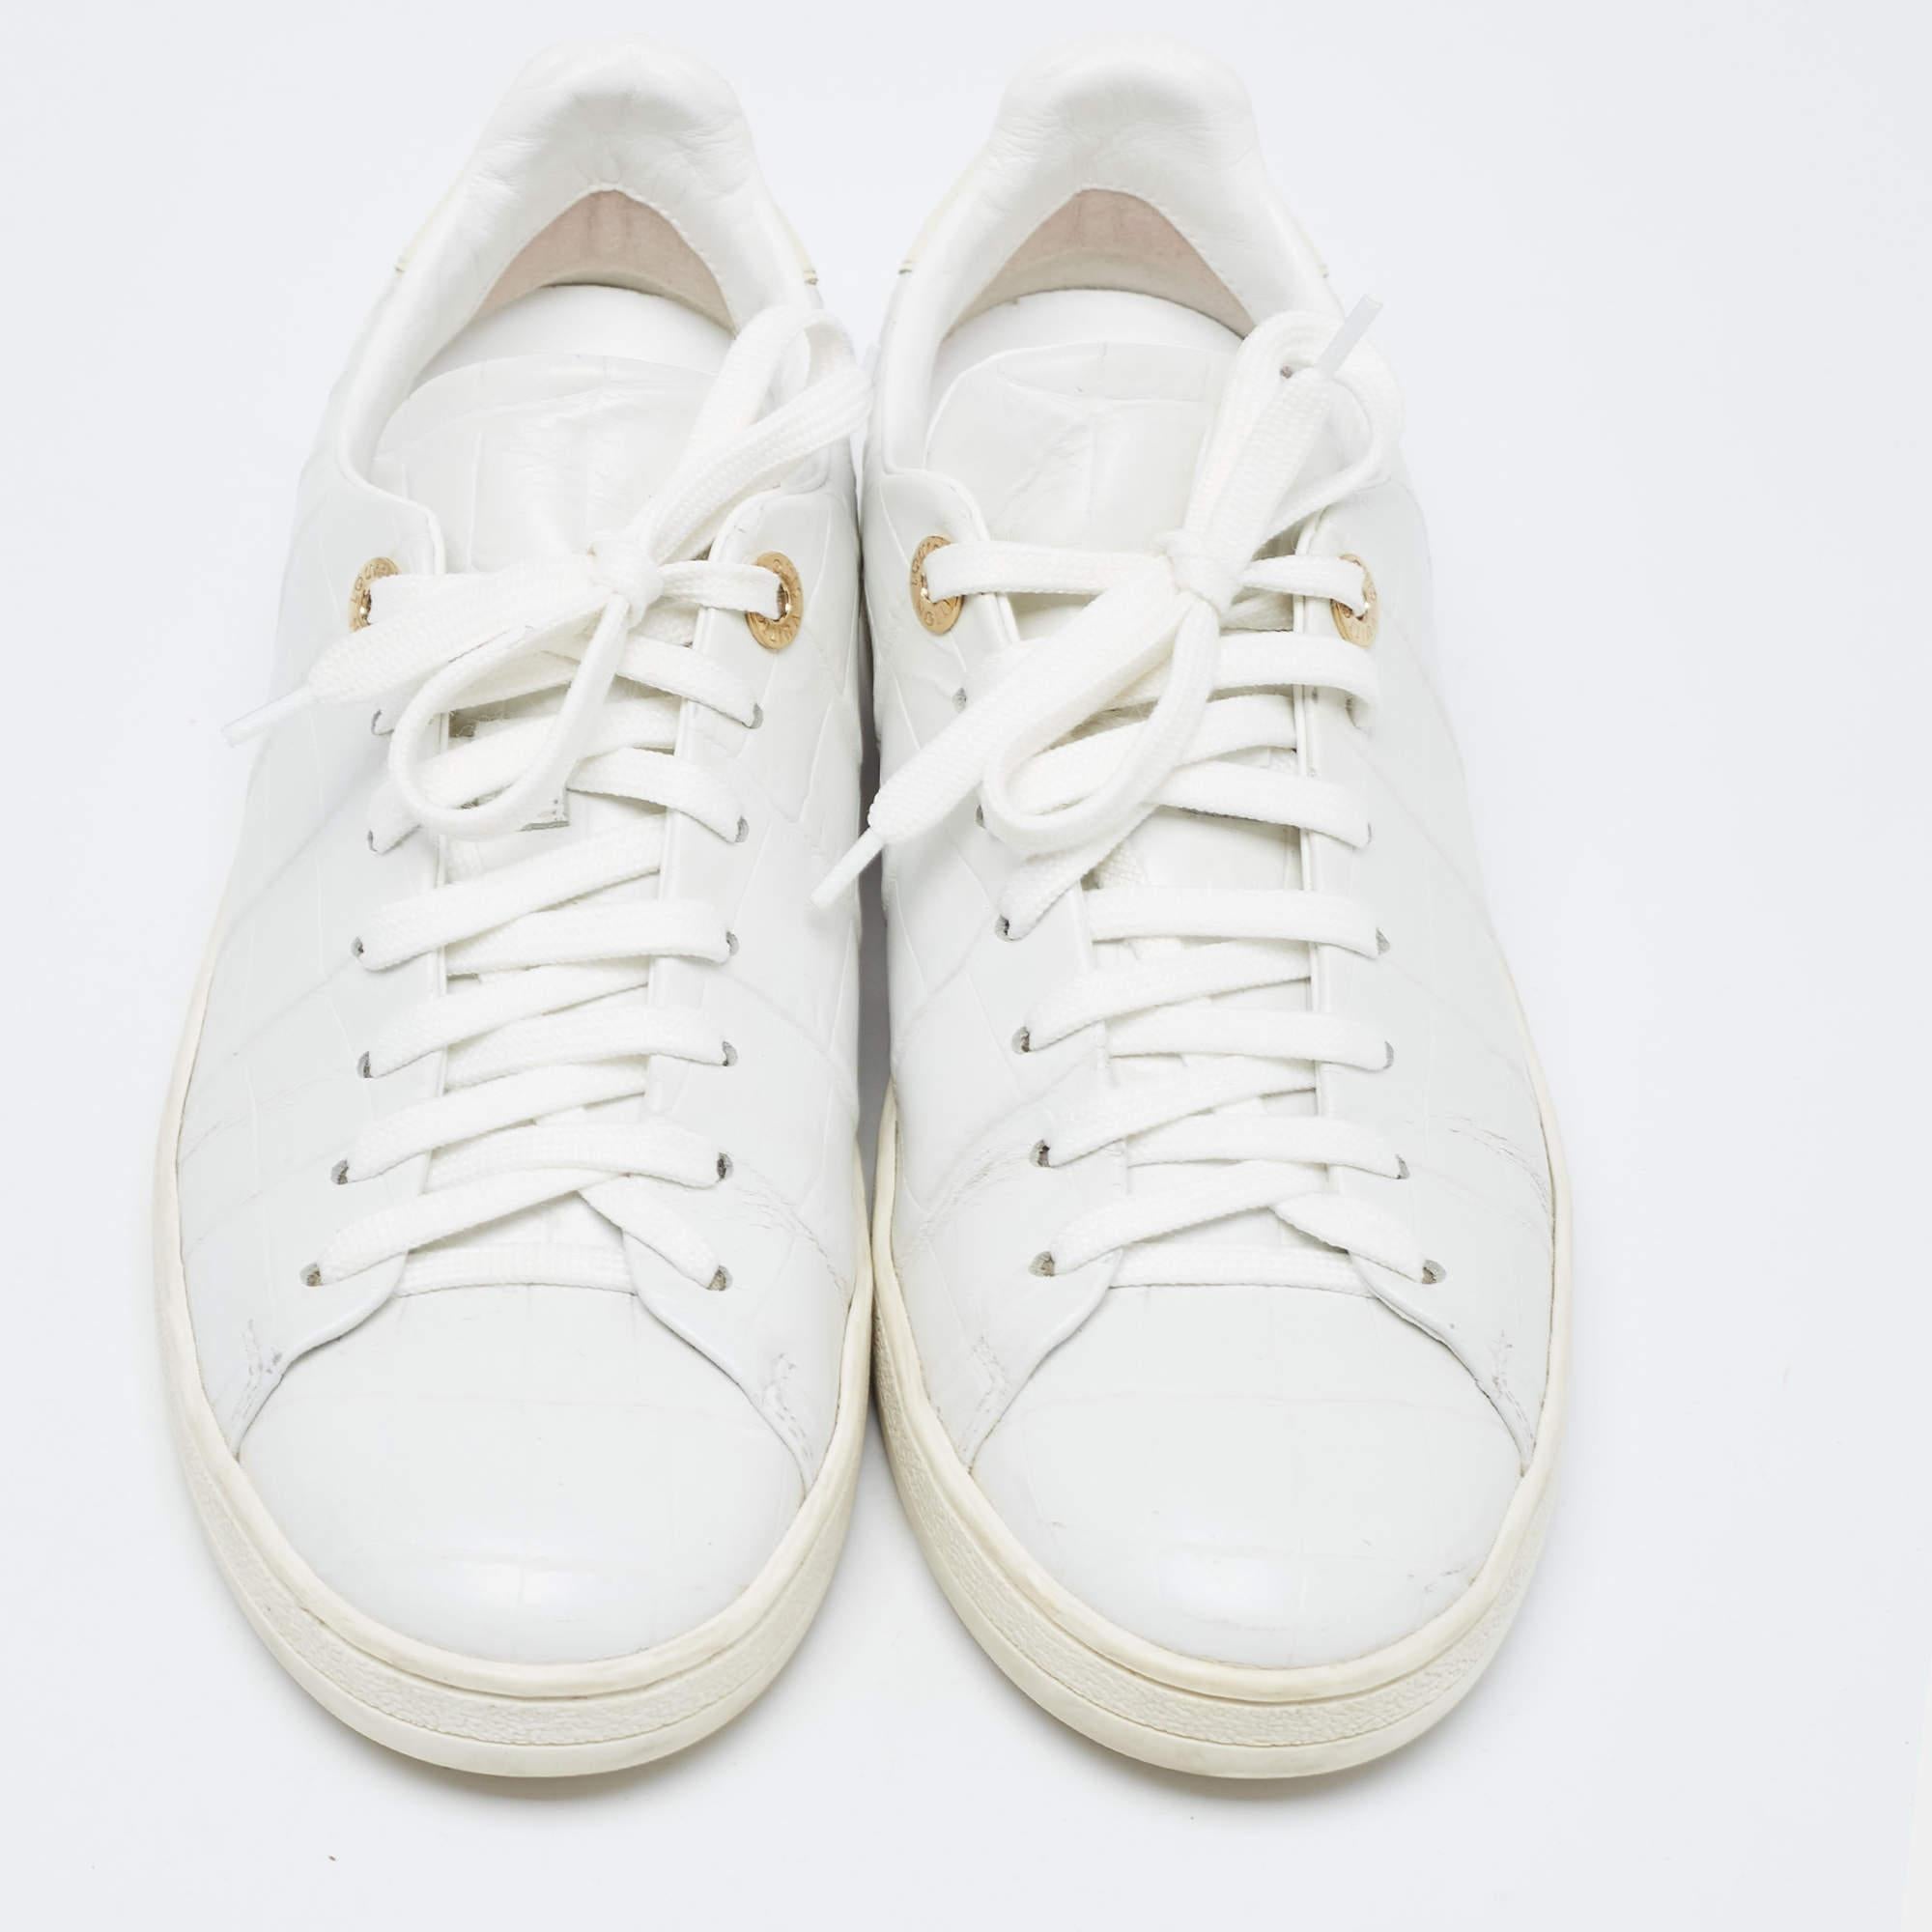 Louis Vuitton White Croc Embossed Leather Frontrow Sneakers Size 36.5 In Good Condition For Sale In Dubai, Al Qouz 2